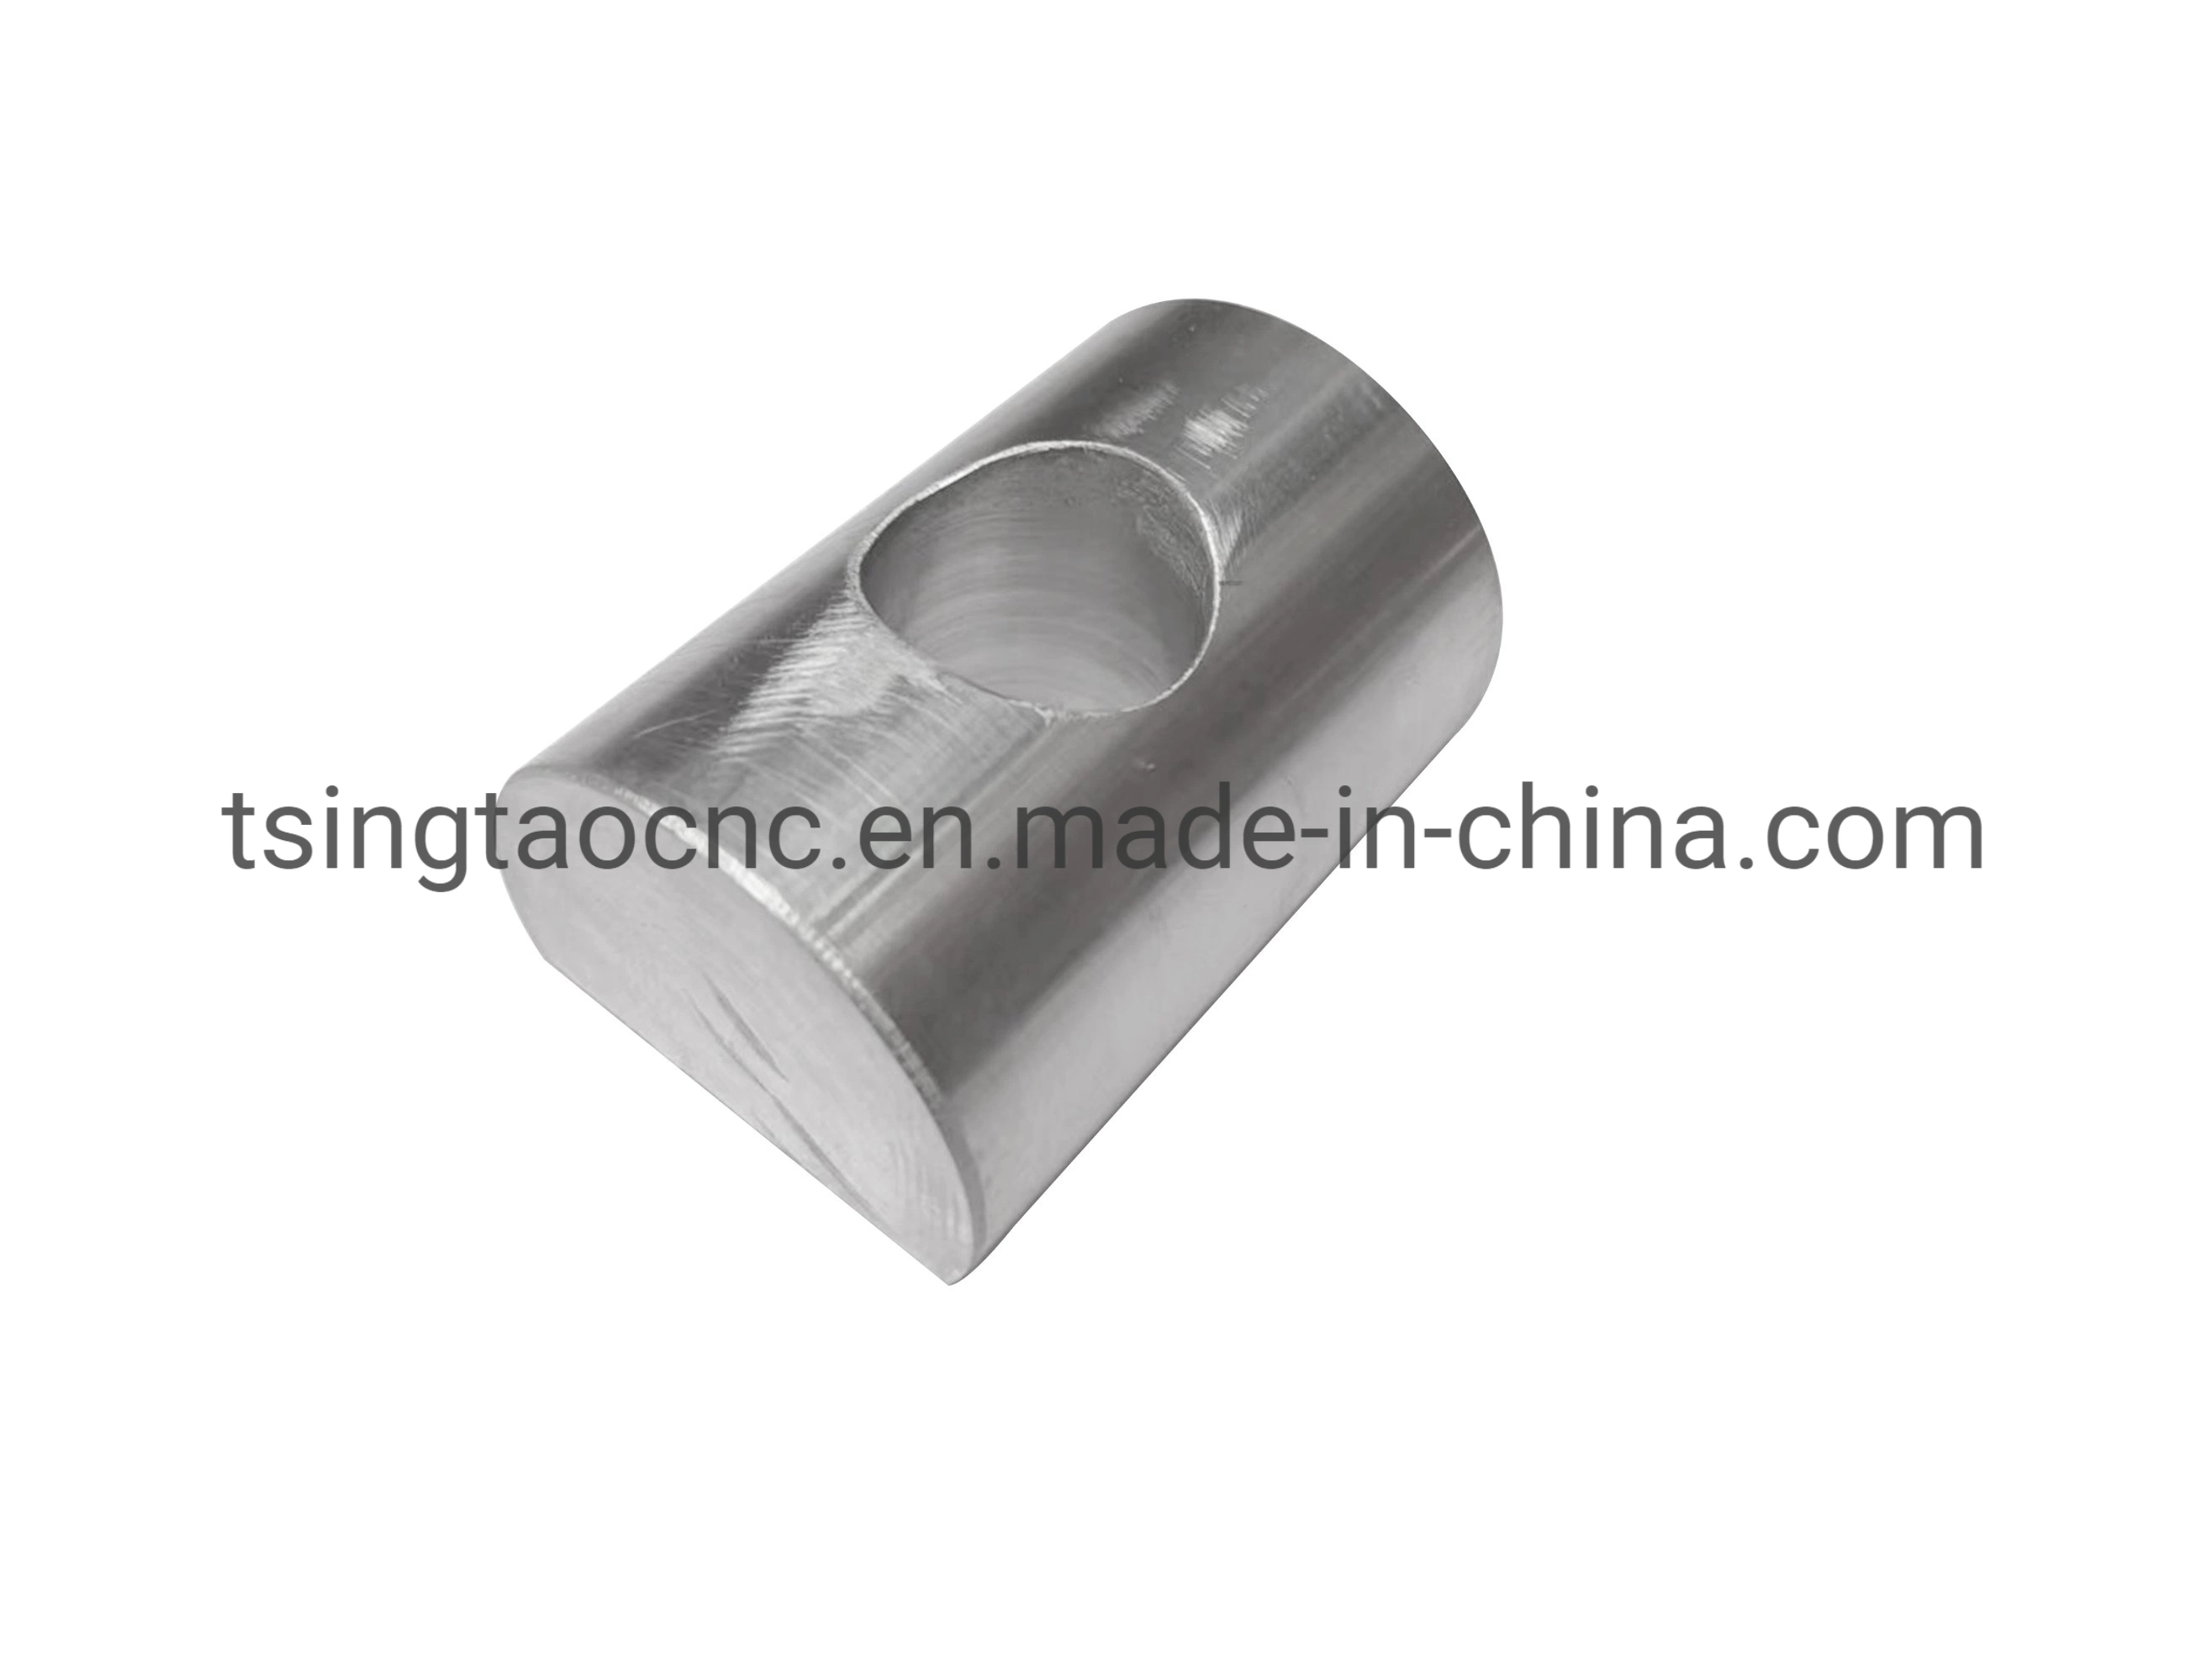 Customized/OEM Precision Aluminum/Aluminium CNC Machinery Machined Machining Part for Car/Motorcycle/Agricultural